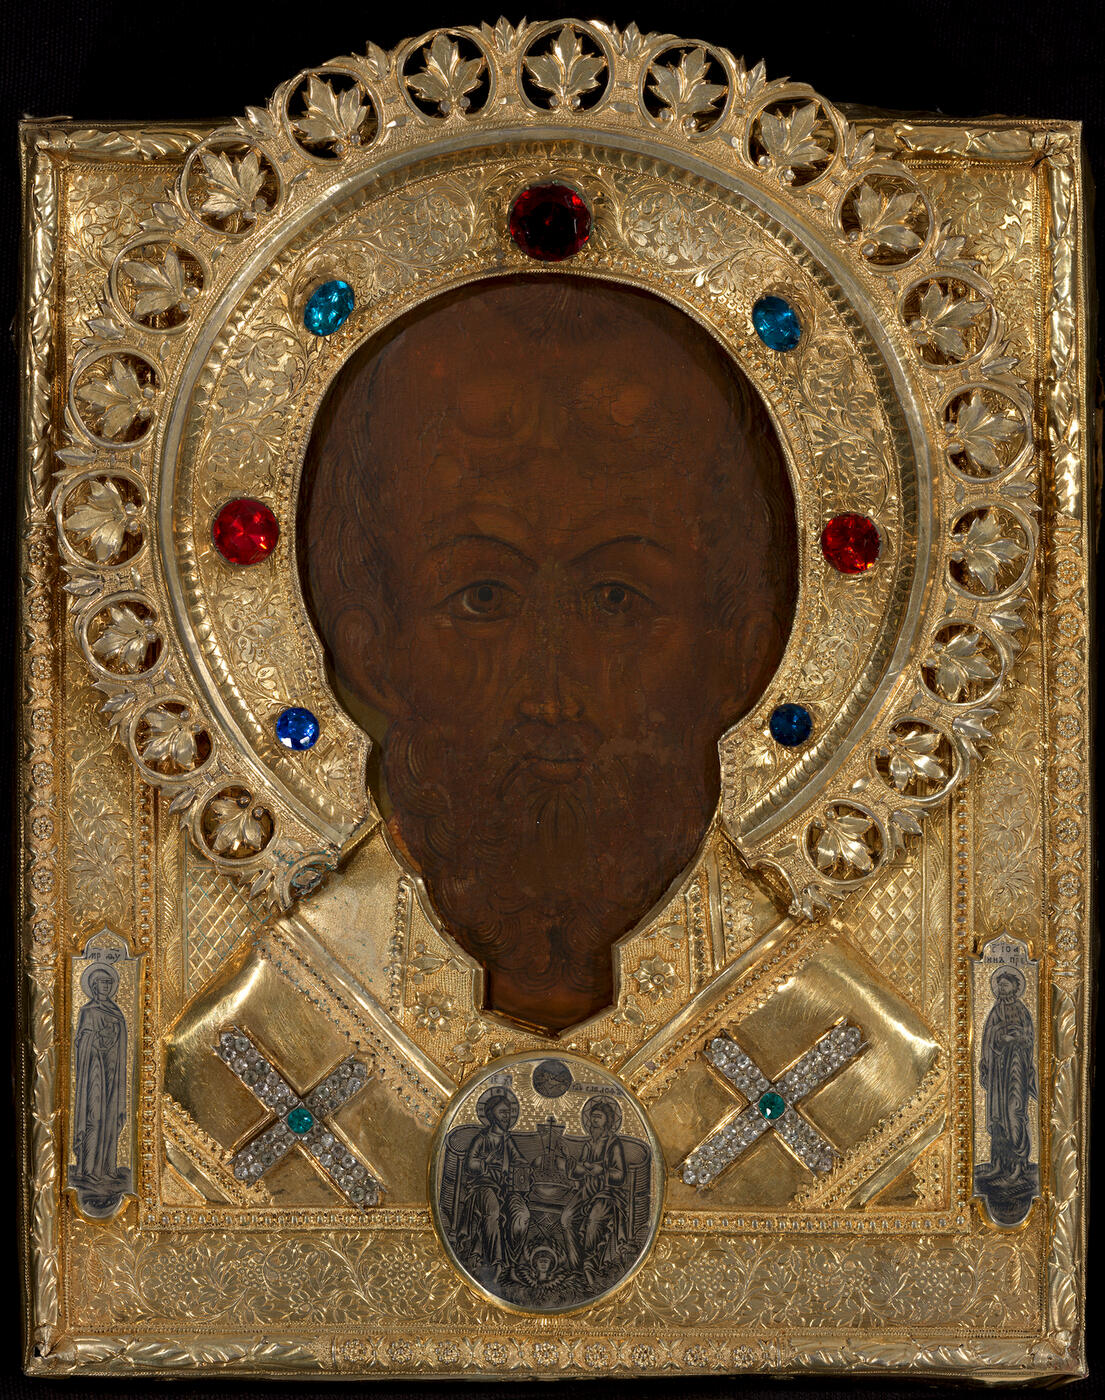 St Nicholas in a Silver-Gilt Oklad with Plaques